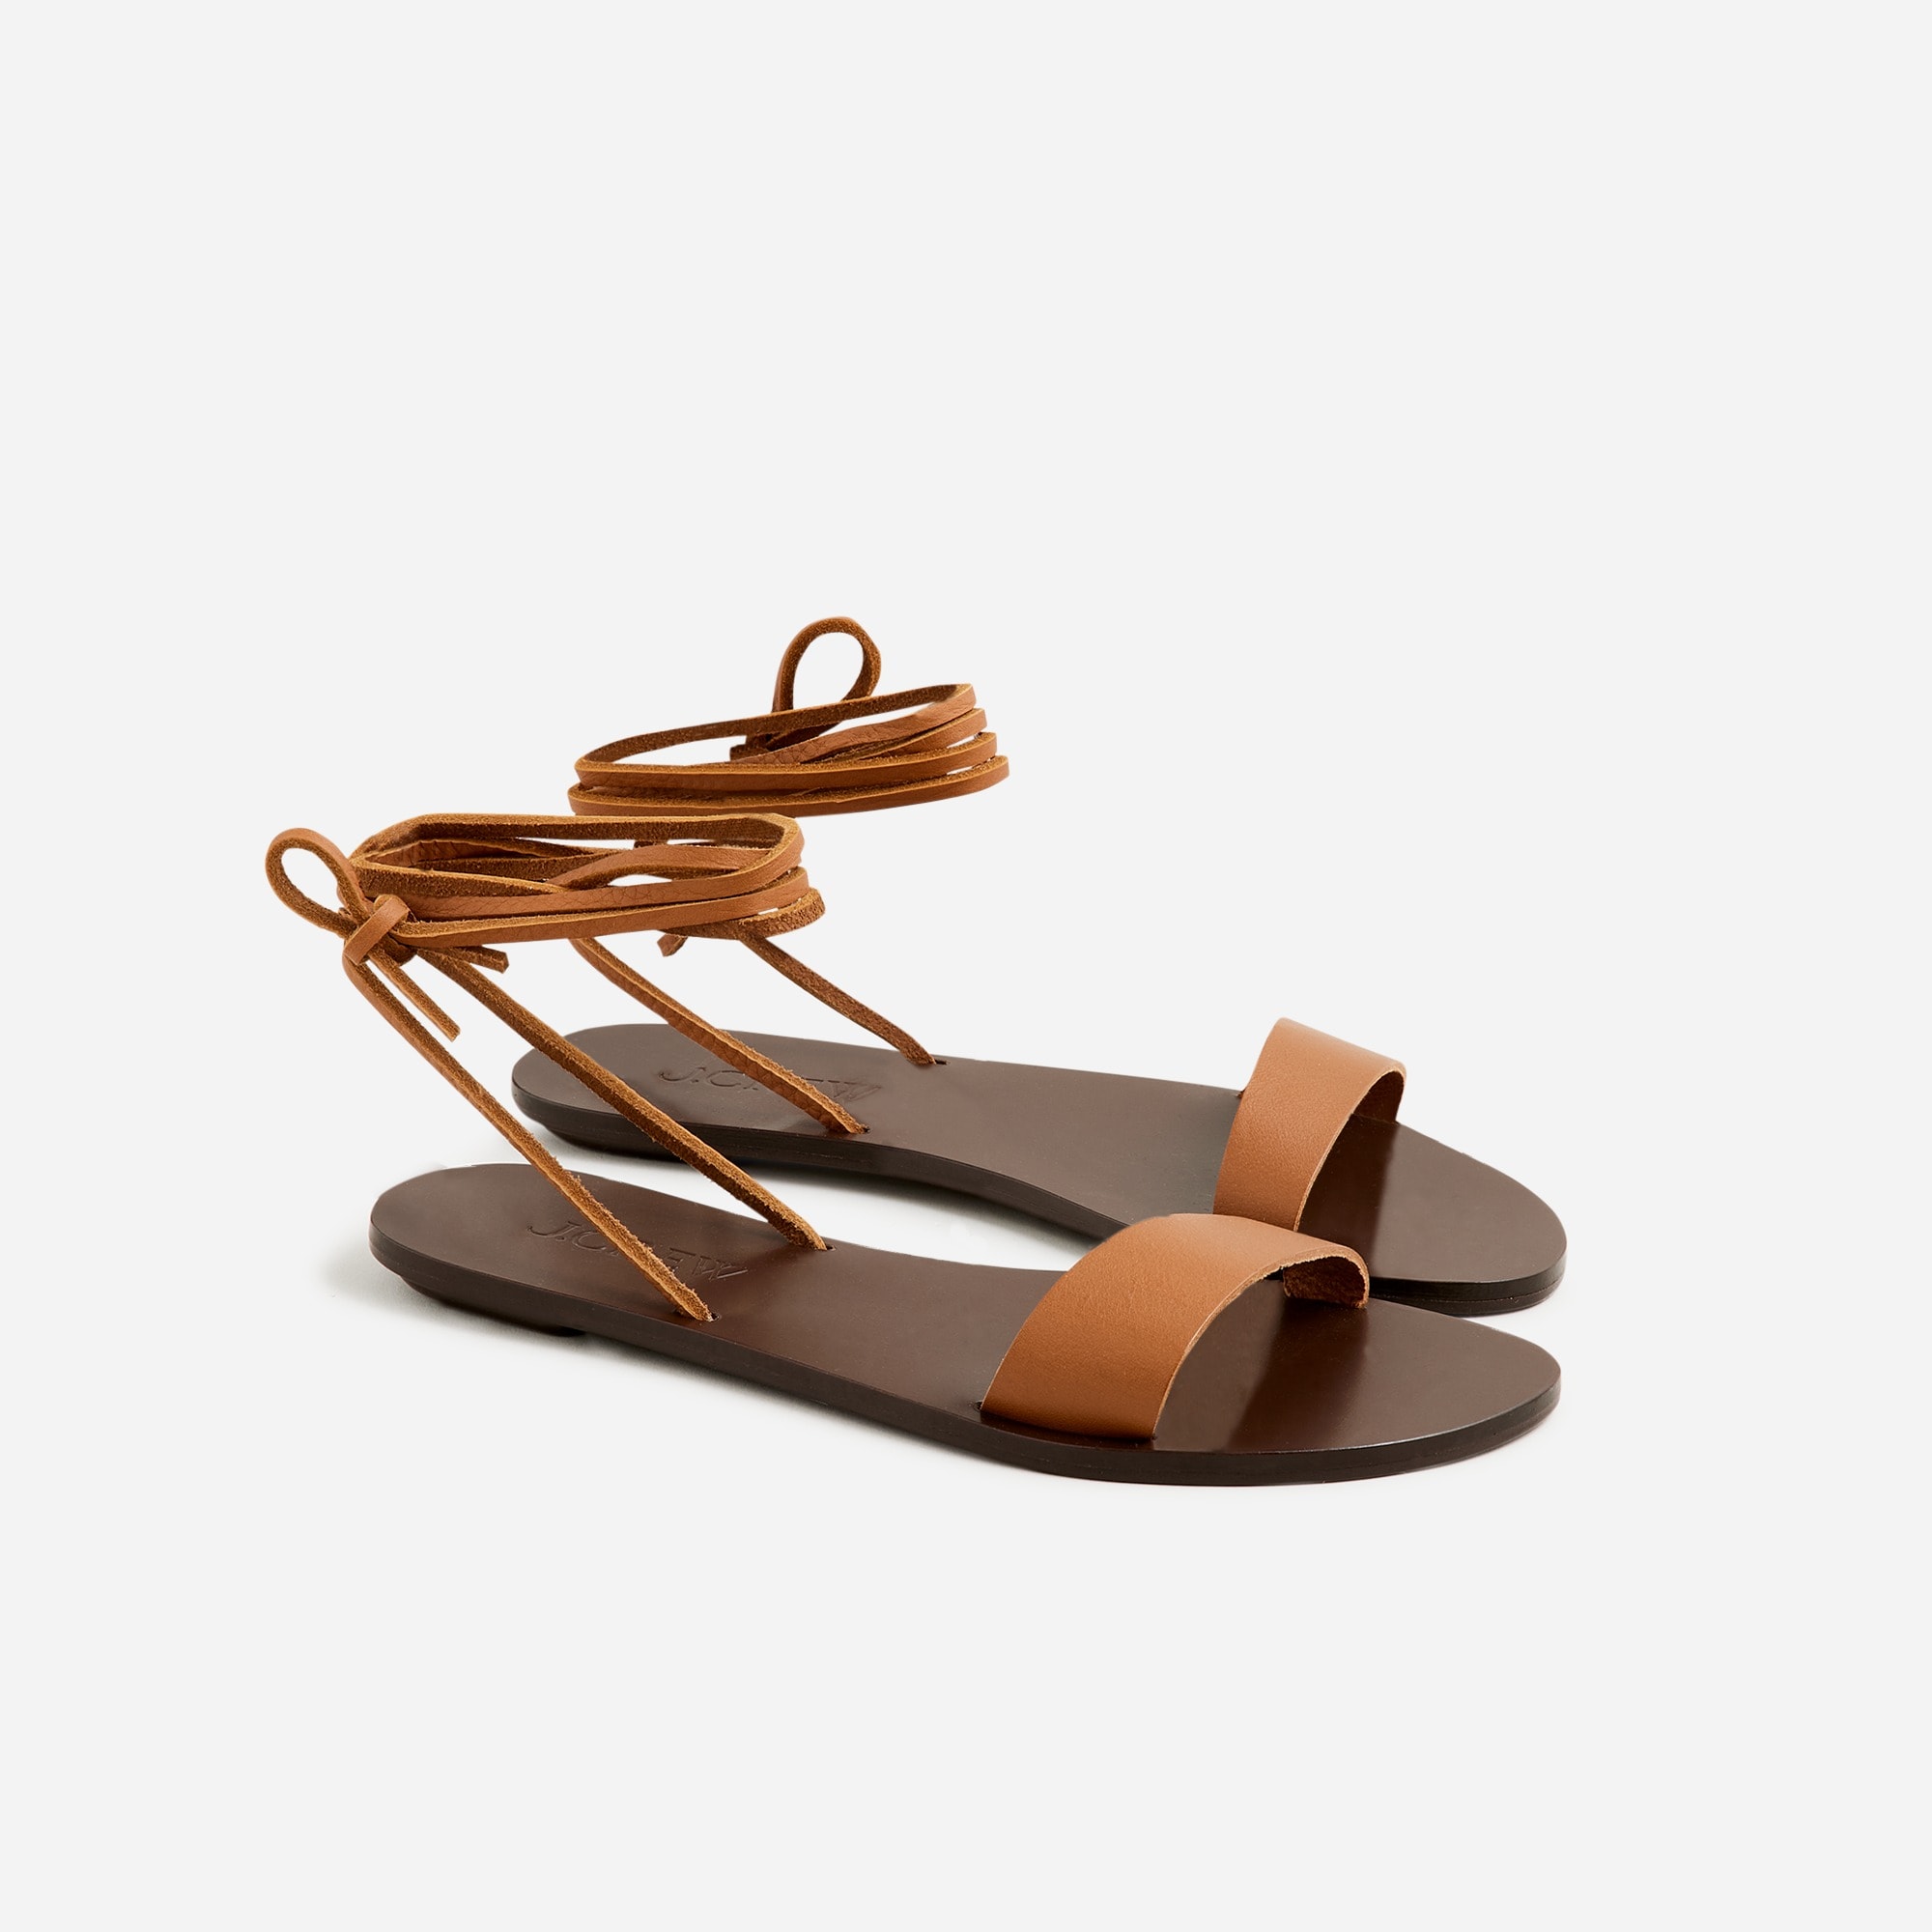  Made-in-Italy lace-up sandals in leather